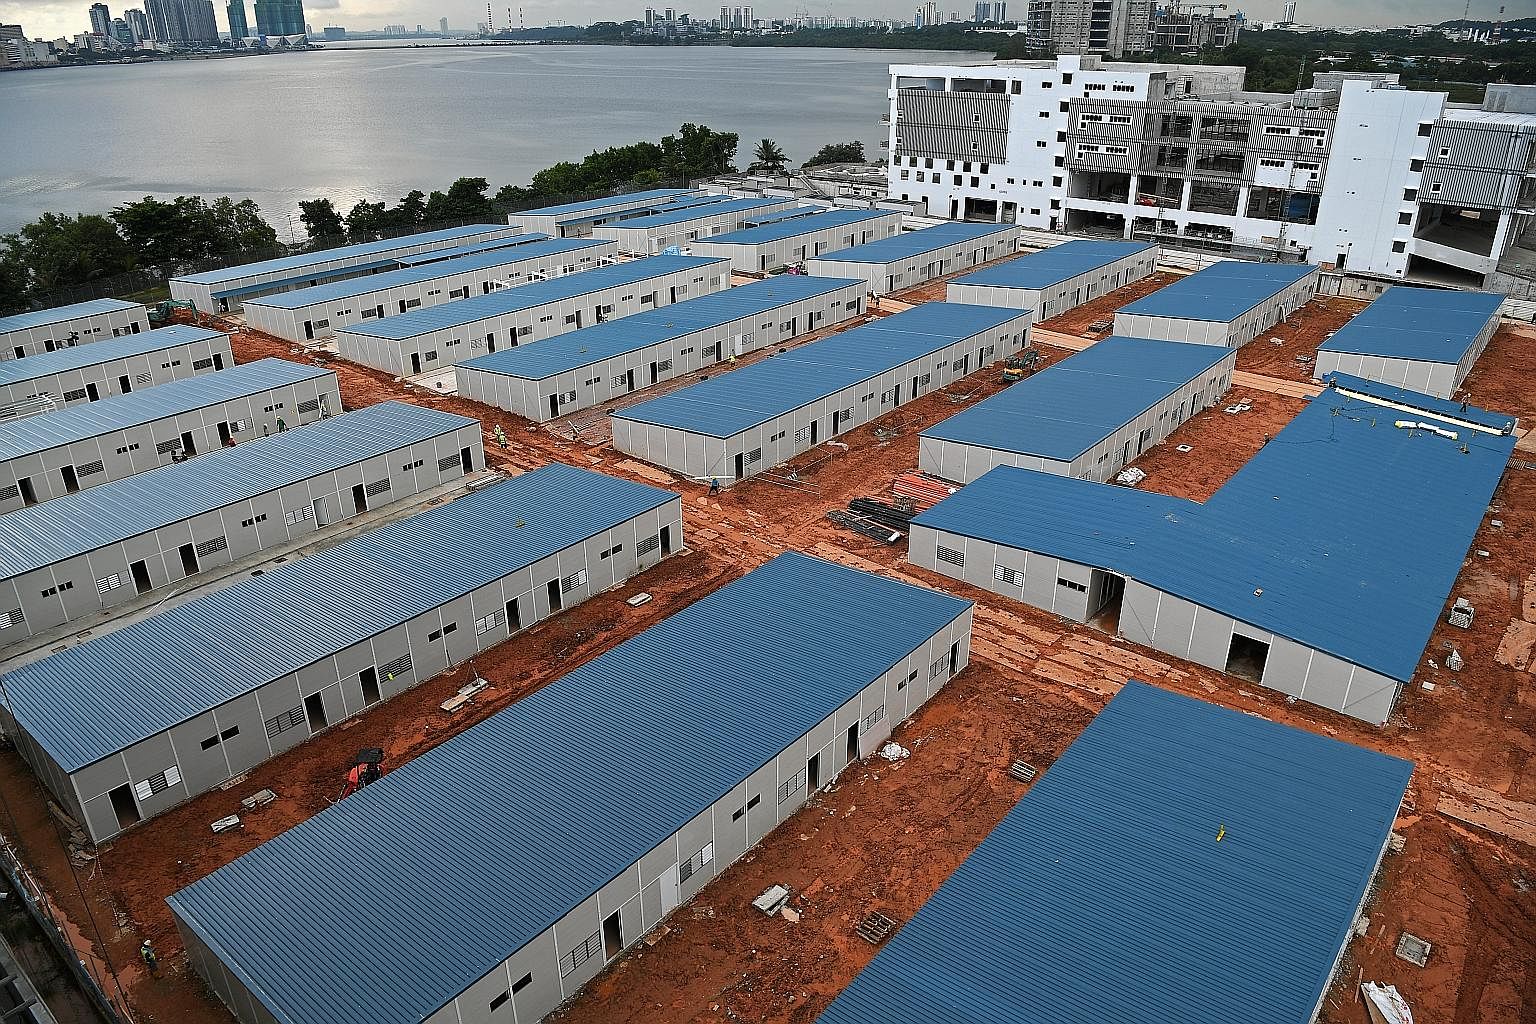 A new Quick Build Dormitory (QBD) is being built in Kranji Way. It is one of the temporary structures that will serve as a test bed for the Government to pilot improved standards for dormitories before it decides on specifications for new permanent d